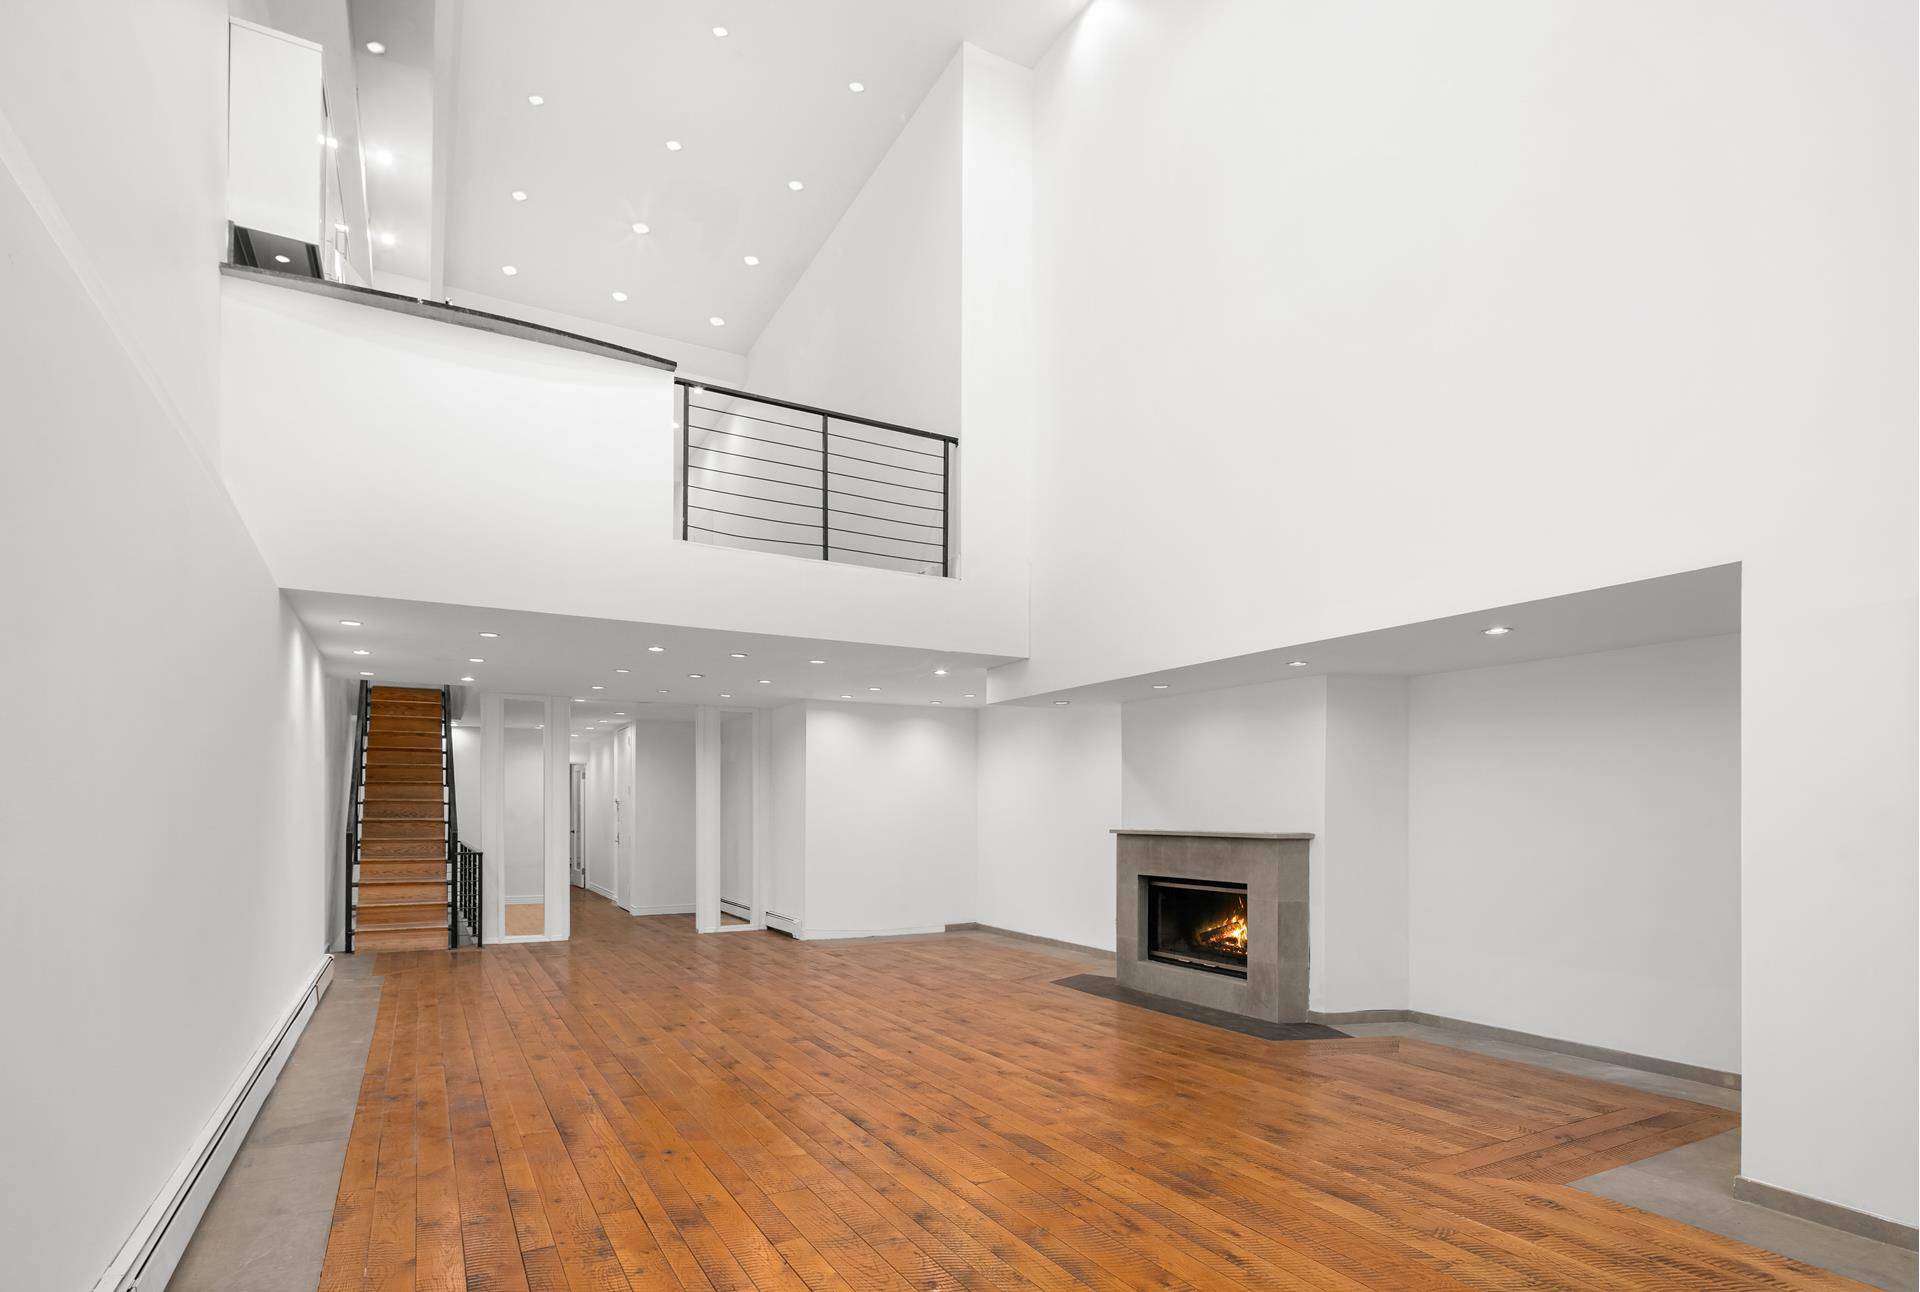 Welcome to the 53 Murray Street, a 5, 355 square foot triplex, situated in the prestigious and historically rich TriBeCa.